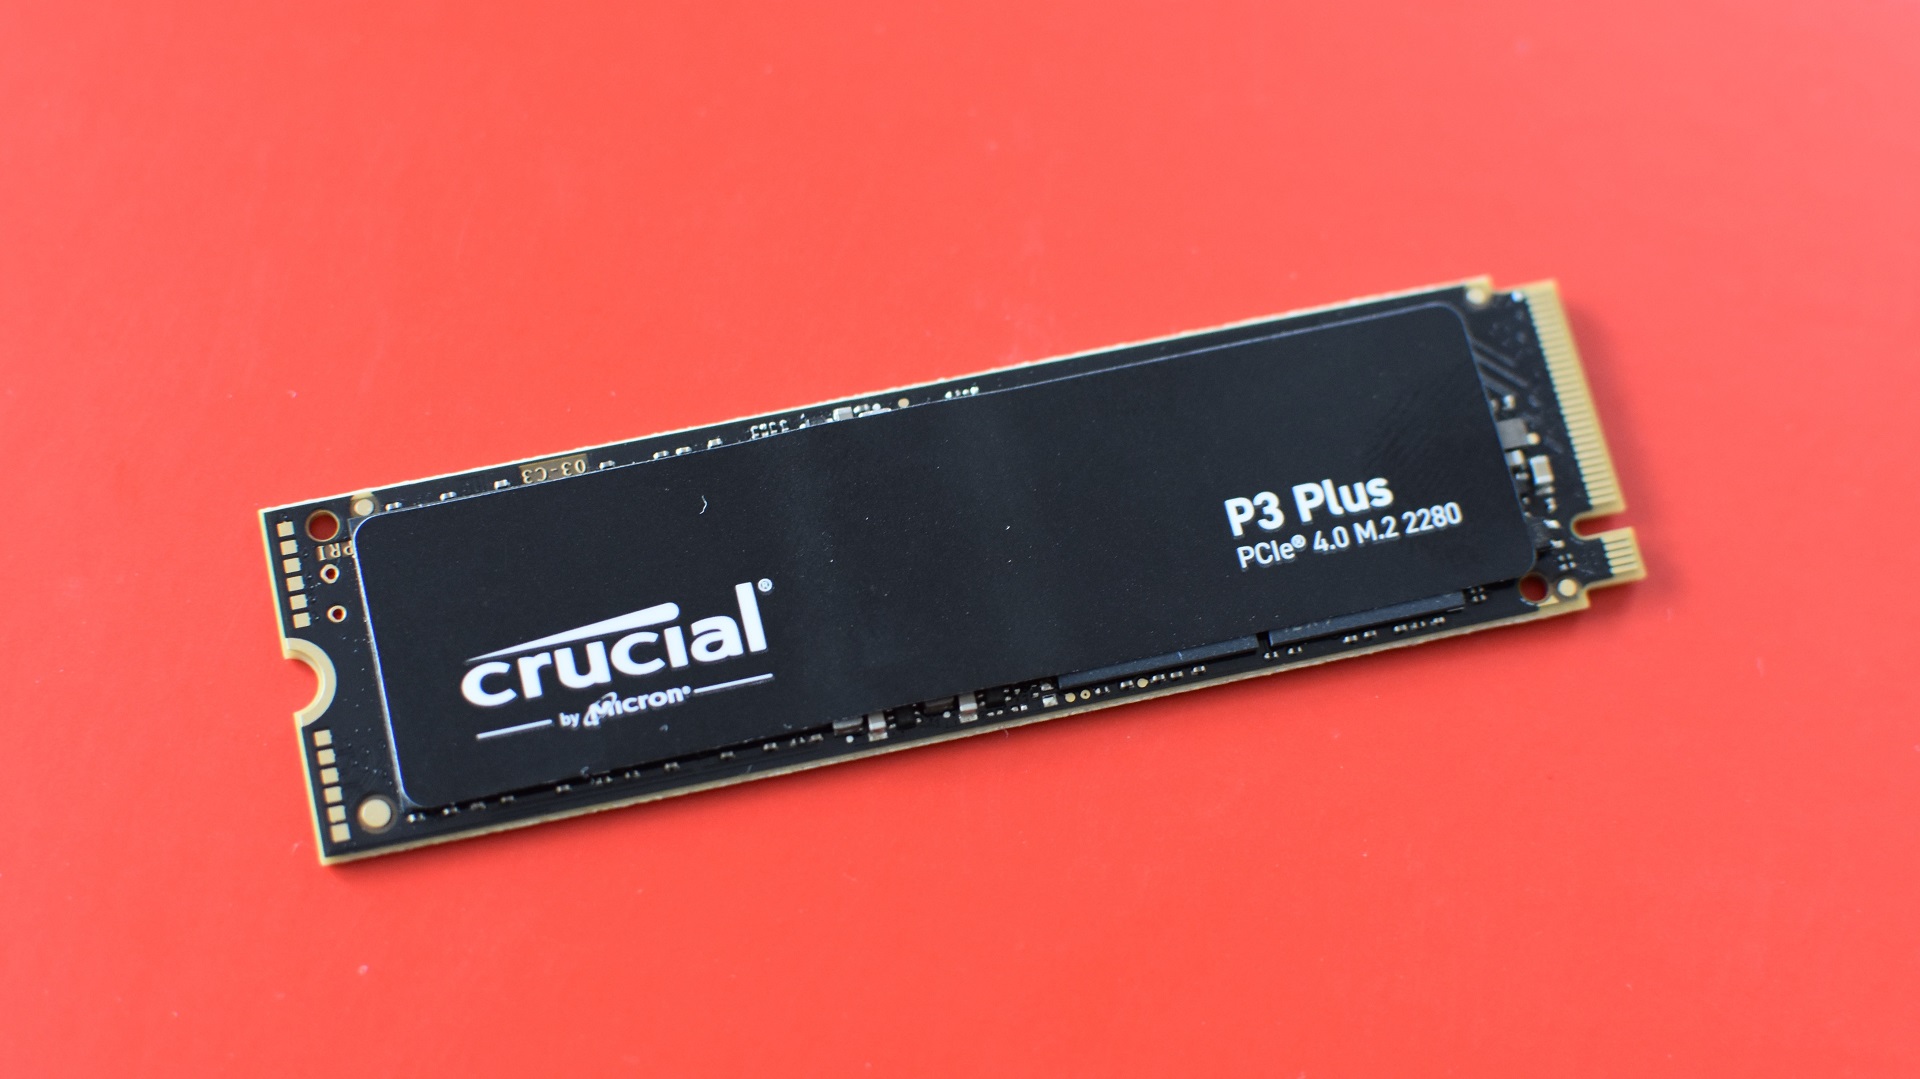 The Crucial P3 Plus SSD against a red background.